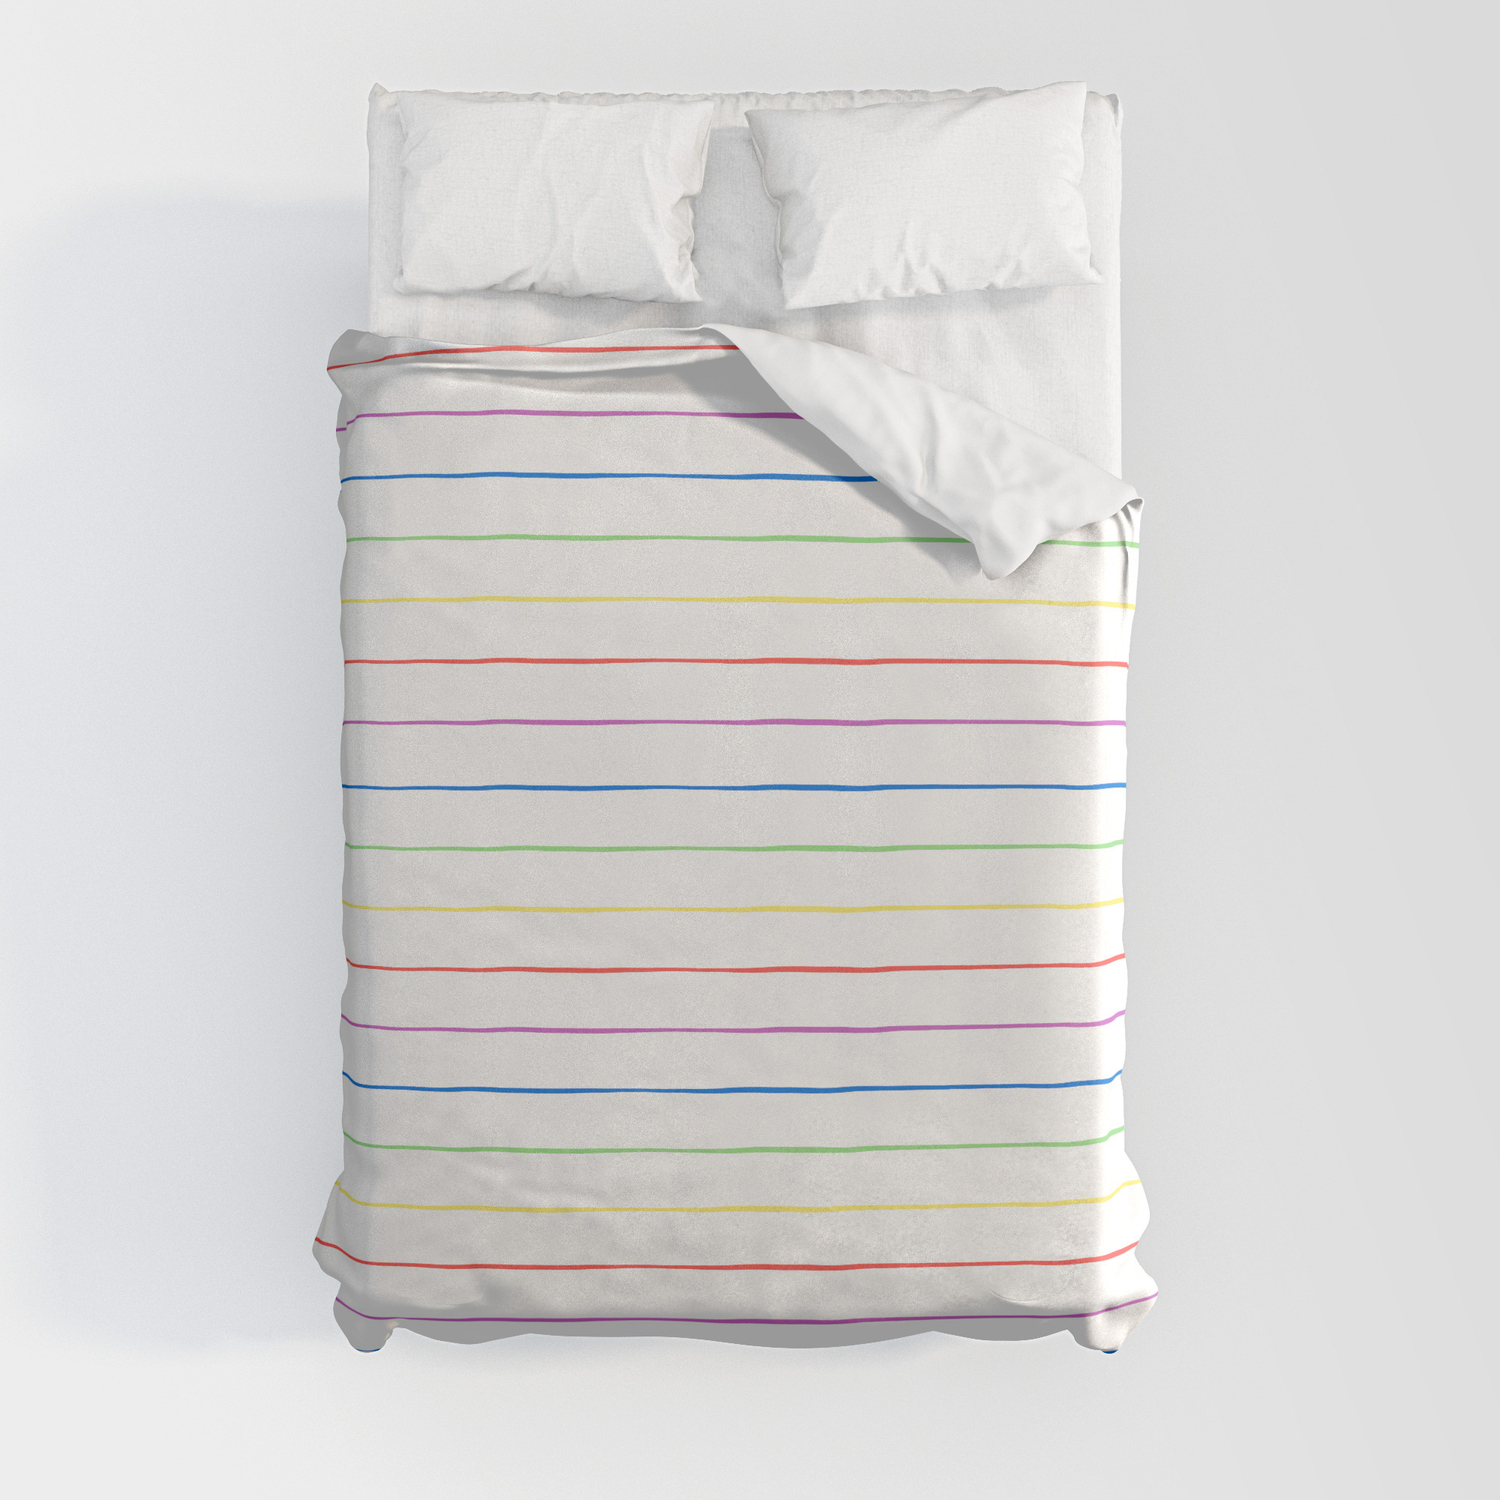 Rainbow Stripe Duvet Cover By Makescout, Rainbow Stripe Duvet Cover